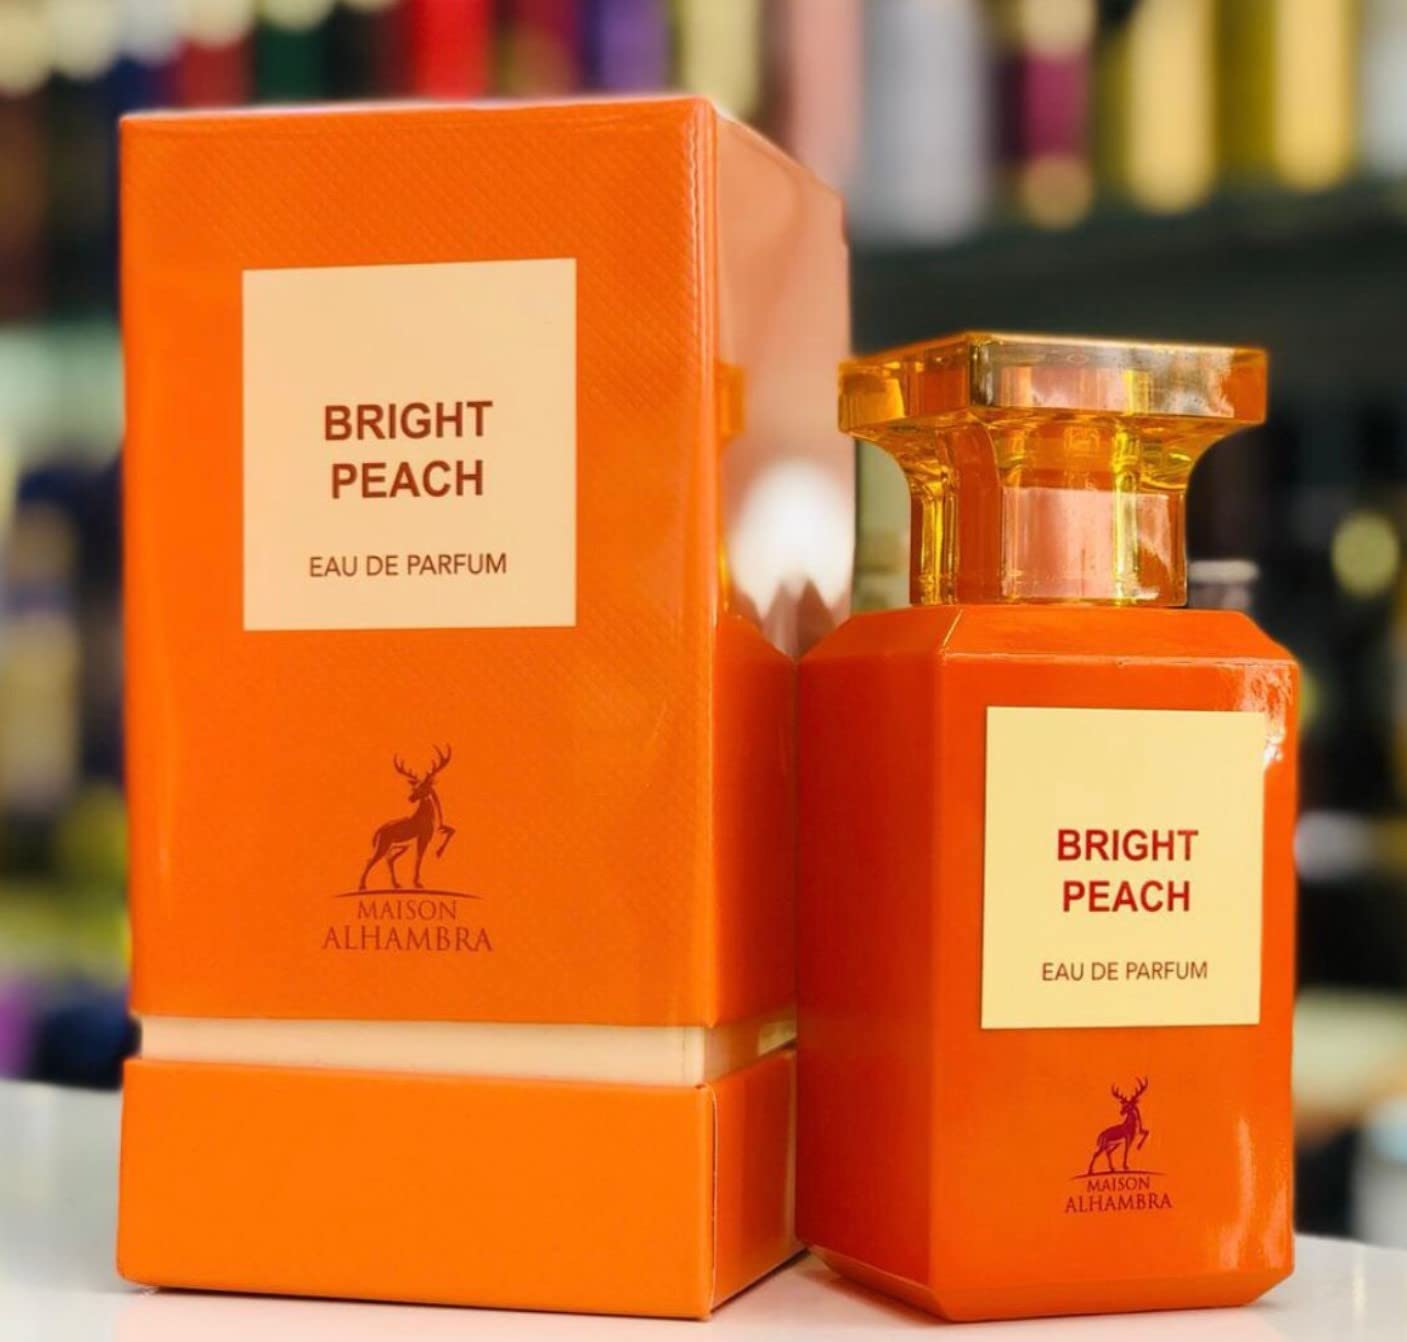 Bright Peach 80ml | Eau de Parfum | Perfume for Women & Men by Maison  Alhambra (Inspired by Bitter Peach by Tom Ford)